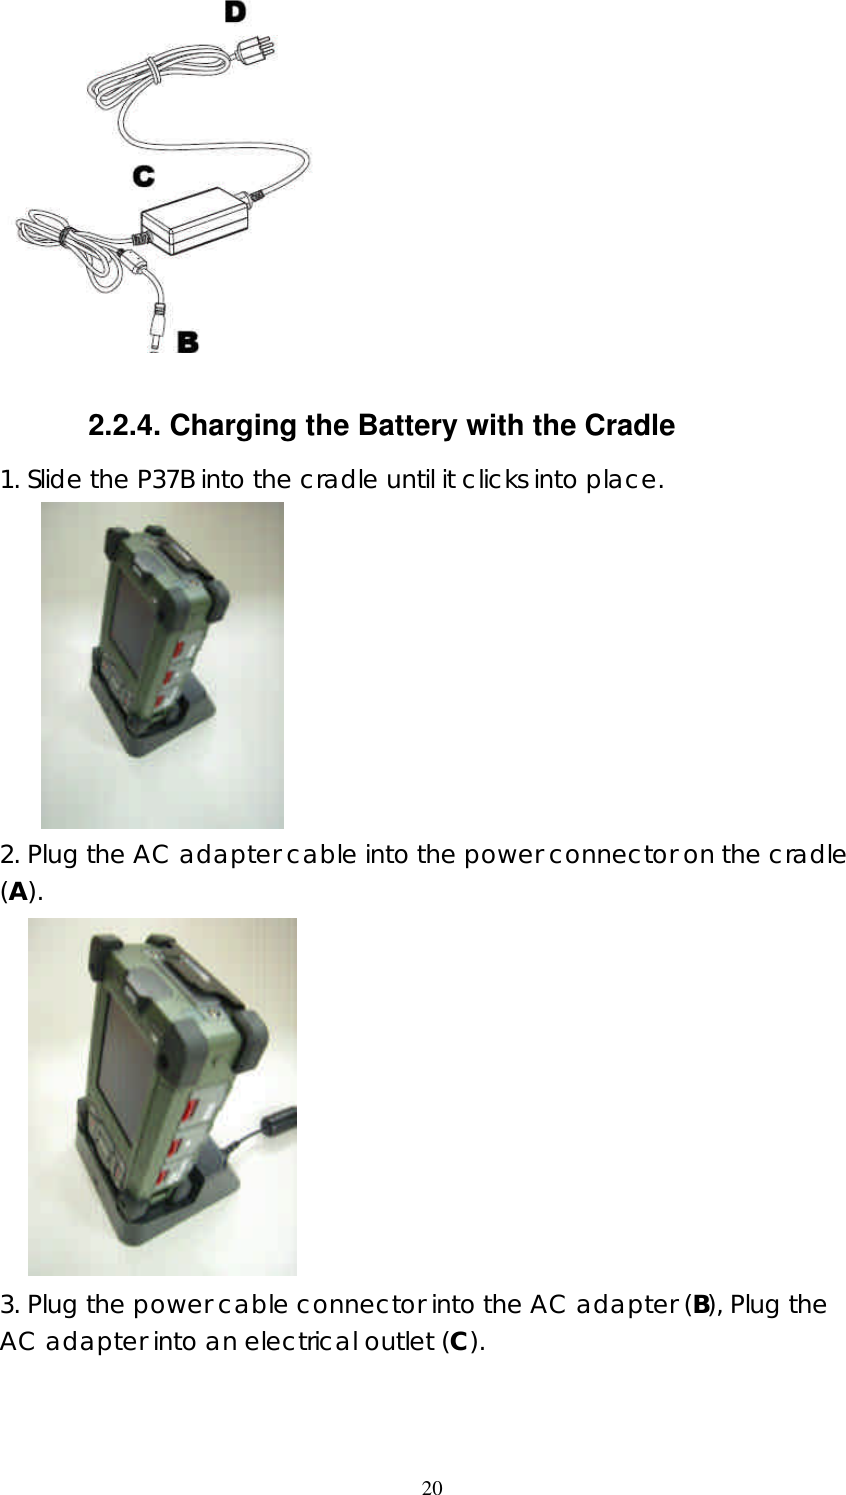  20  2.2.4. Charging the Battery with the Cradle 1. Slide the P37B into the cradle until it clicks into place.       2. Plug the AC adapter cable into the power connector on the cradle (A).     3. Plug the power cable connector into the AC adapter (B), Plug the AC adapter into an electrical outlet (C). 